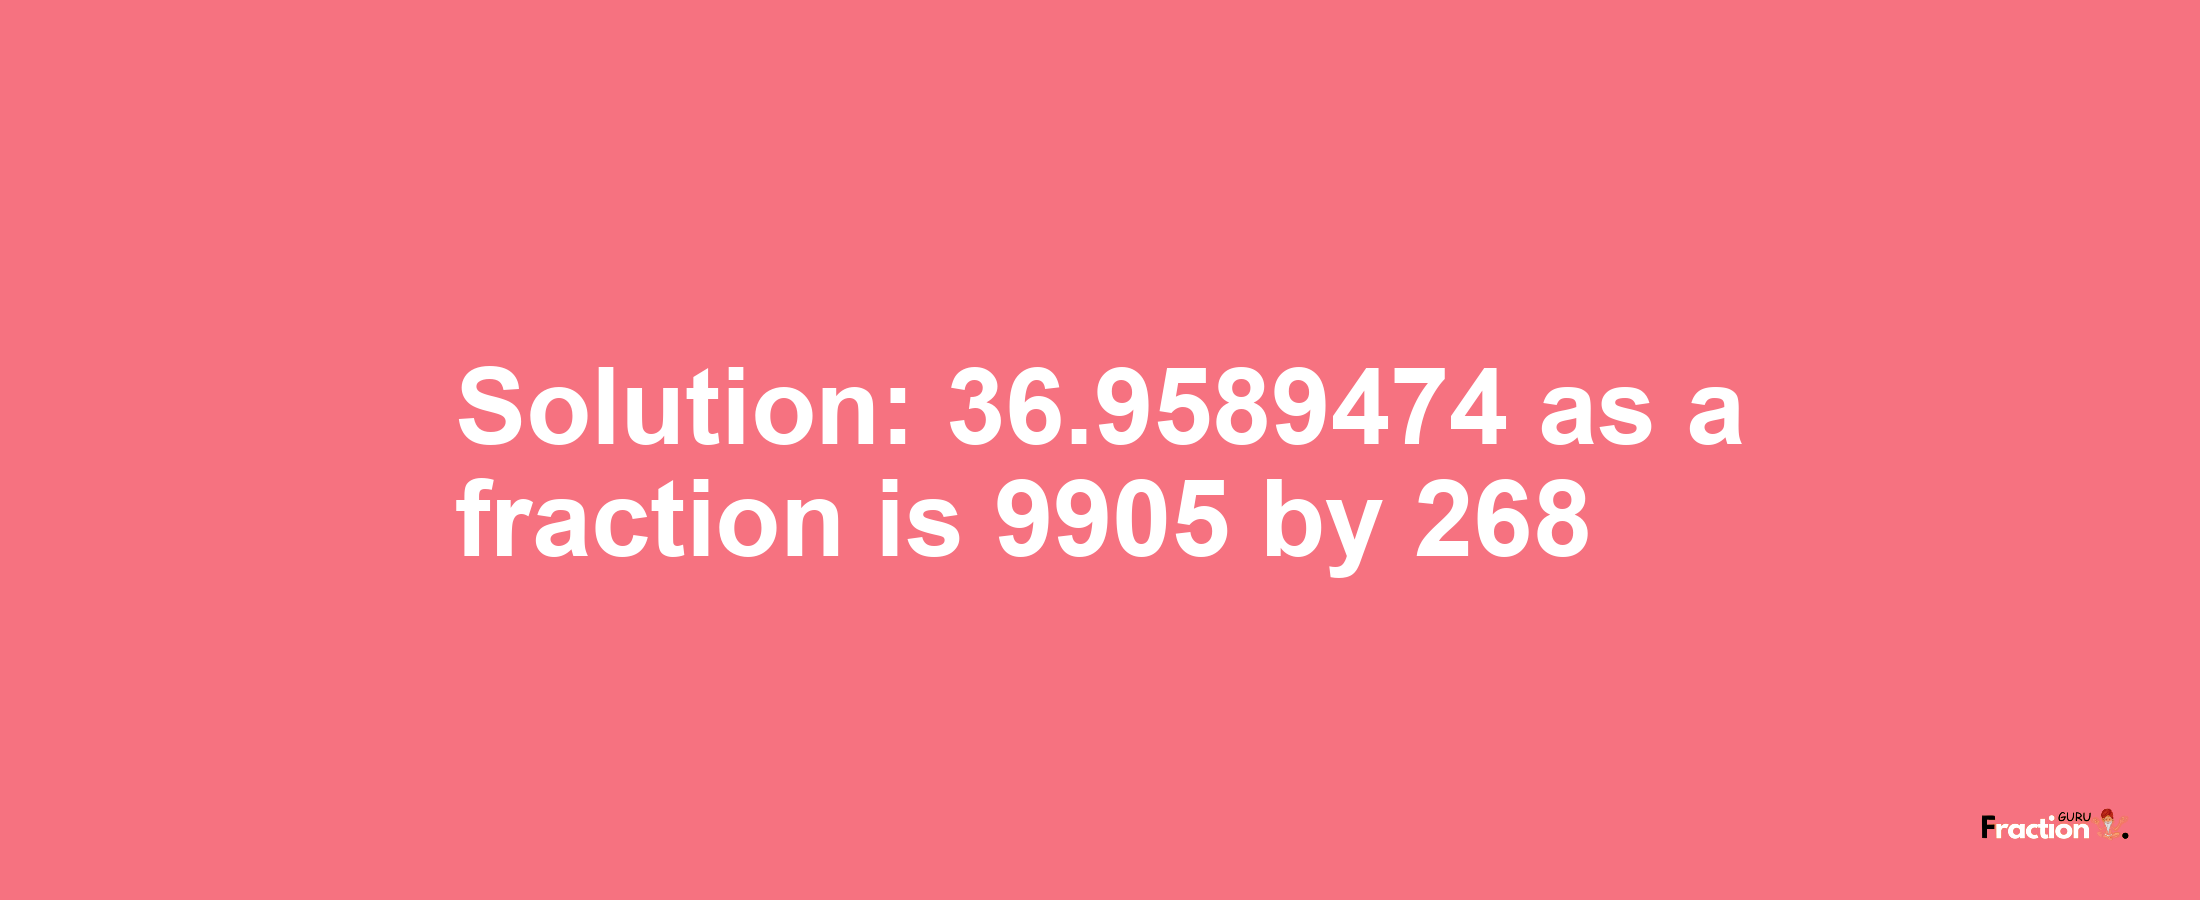 Solution:36.9589474 as a fraction is 9905/268